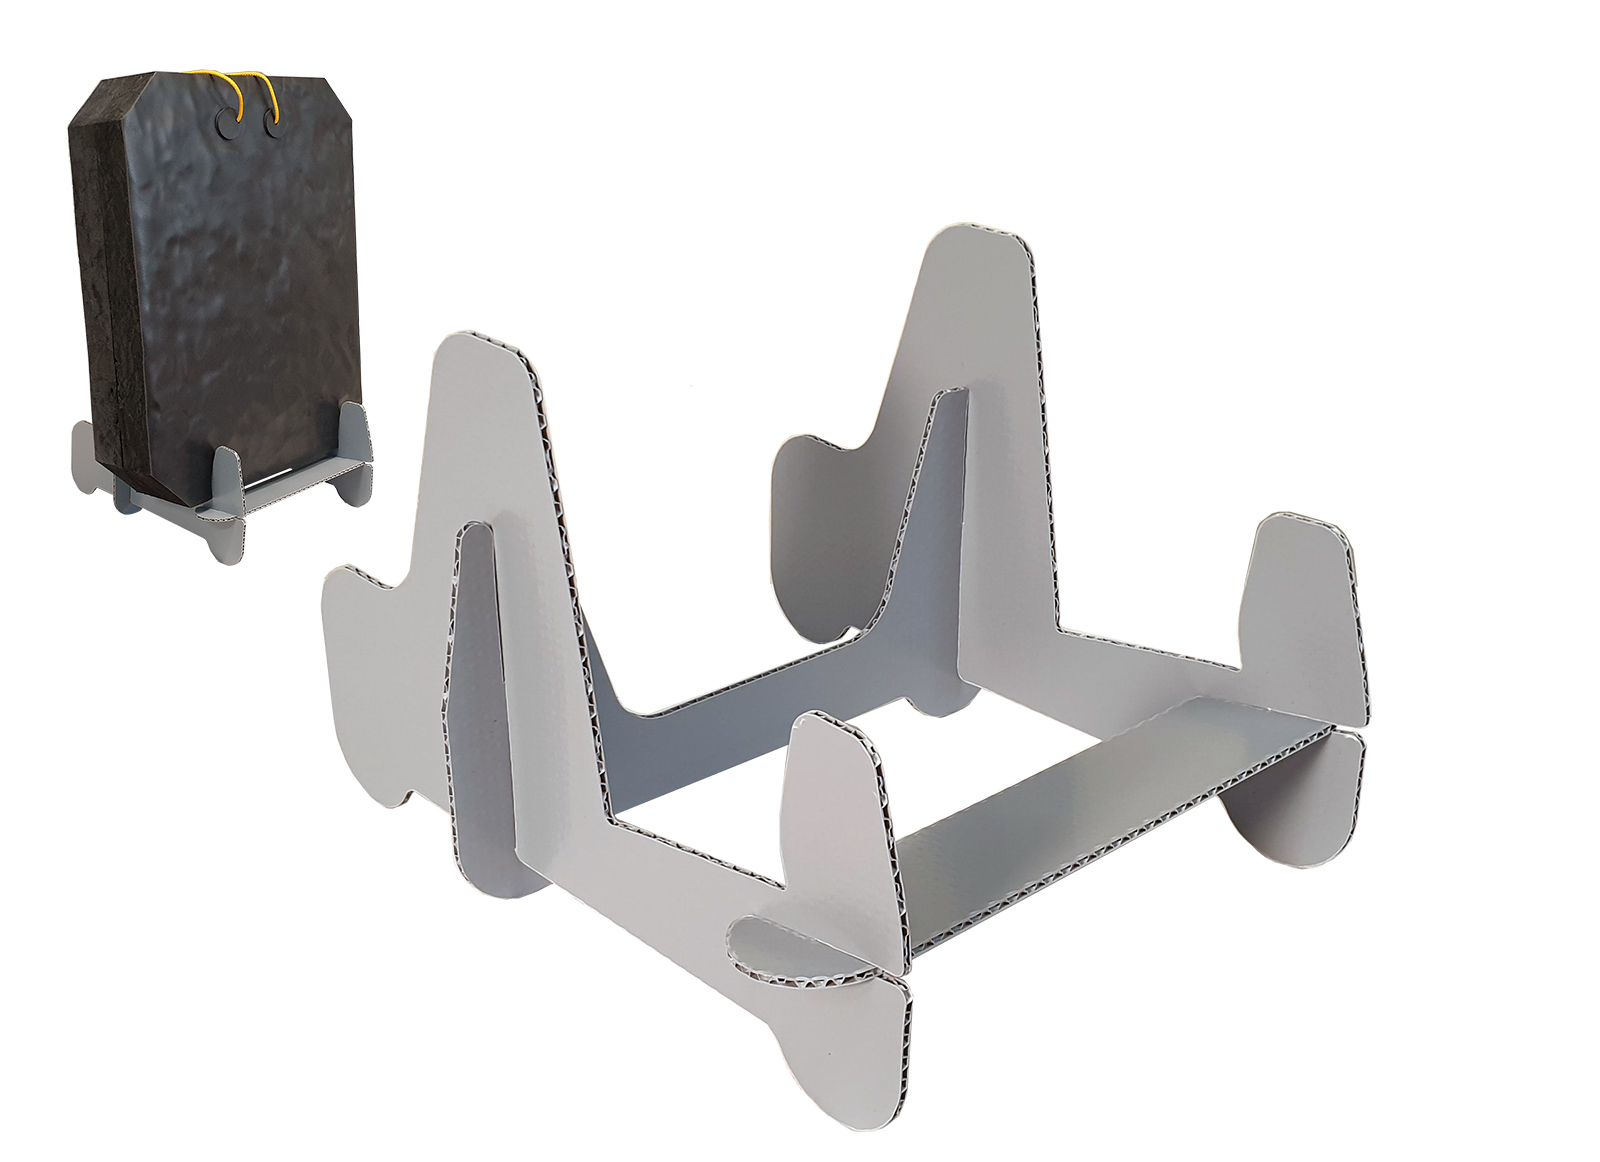 DISPORT ARCHERY STAND FOR FOAM TARGETS 16 CM THICKNESS